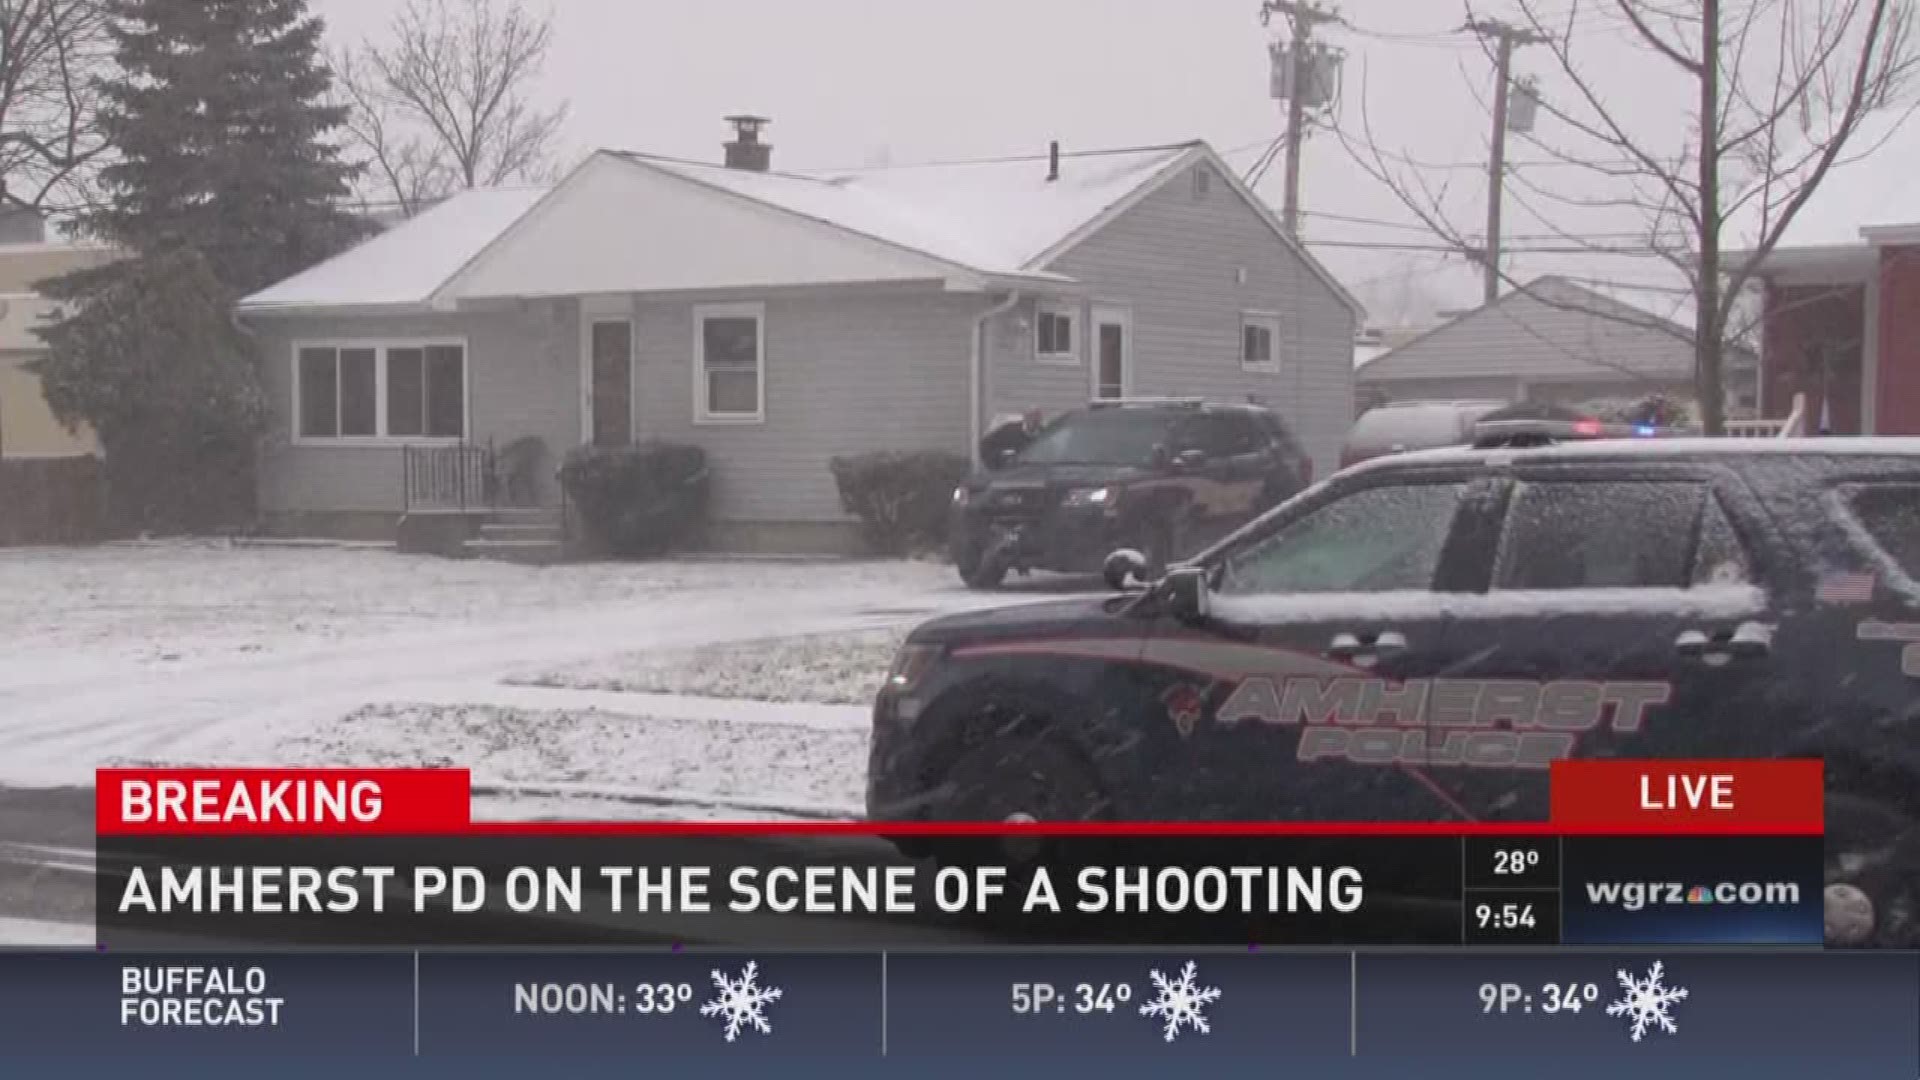 2 on Your Side has the latest on breaking news out of Amherst, where police responded to one person shot.